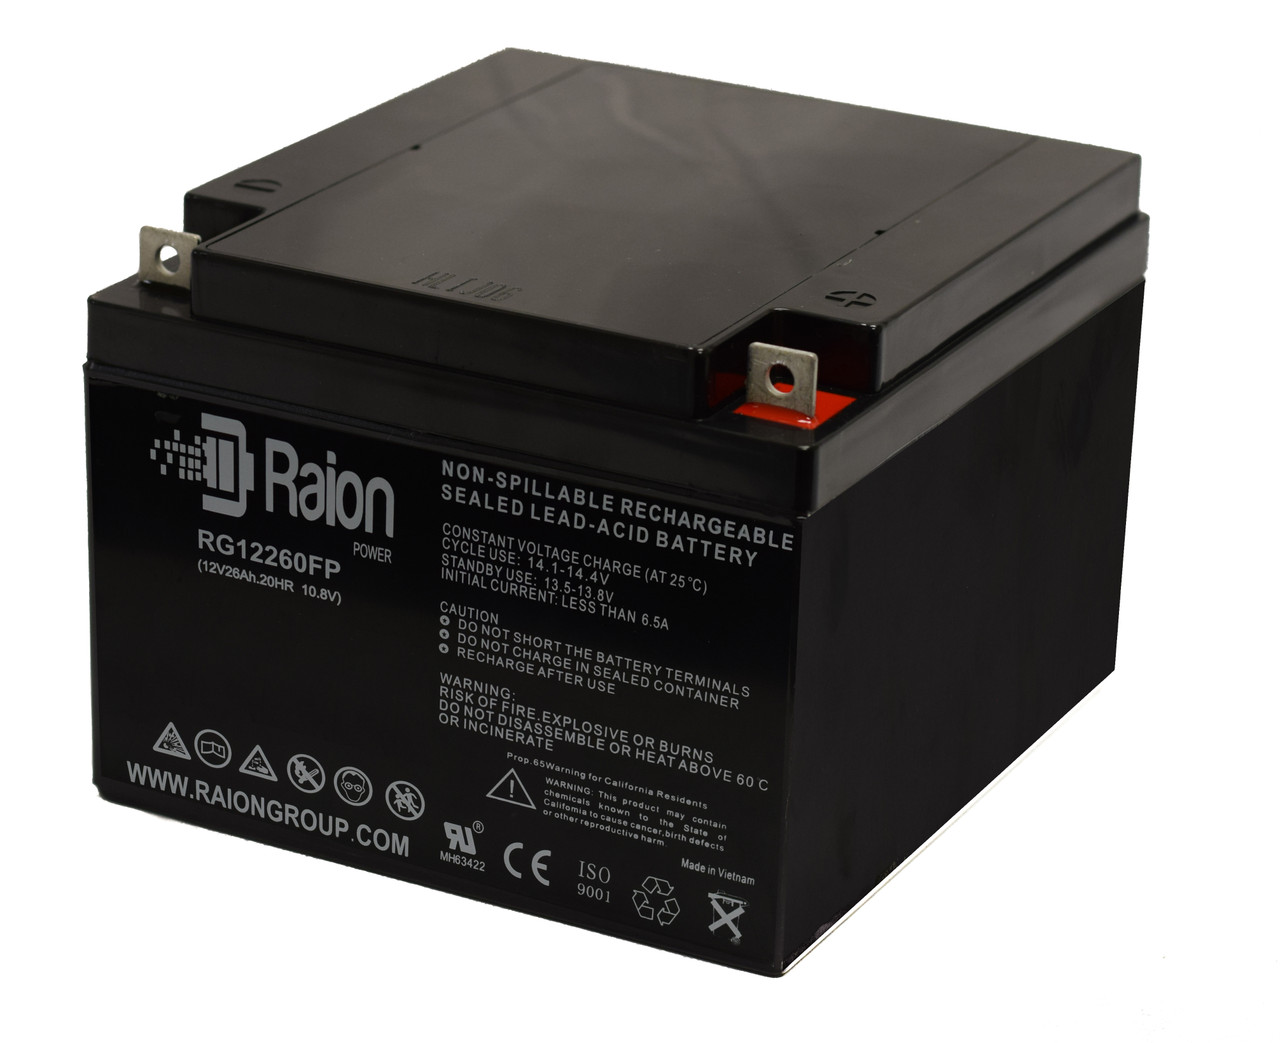 Raion Power Replacement 12V 26Ah Battery for DataLex NP28-12 - 1 Pack